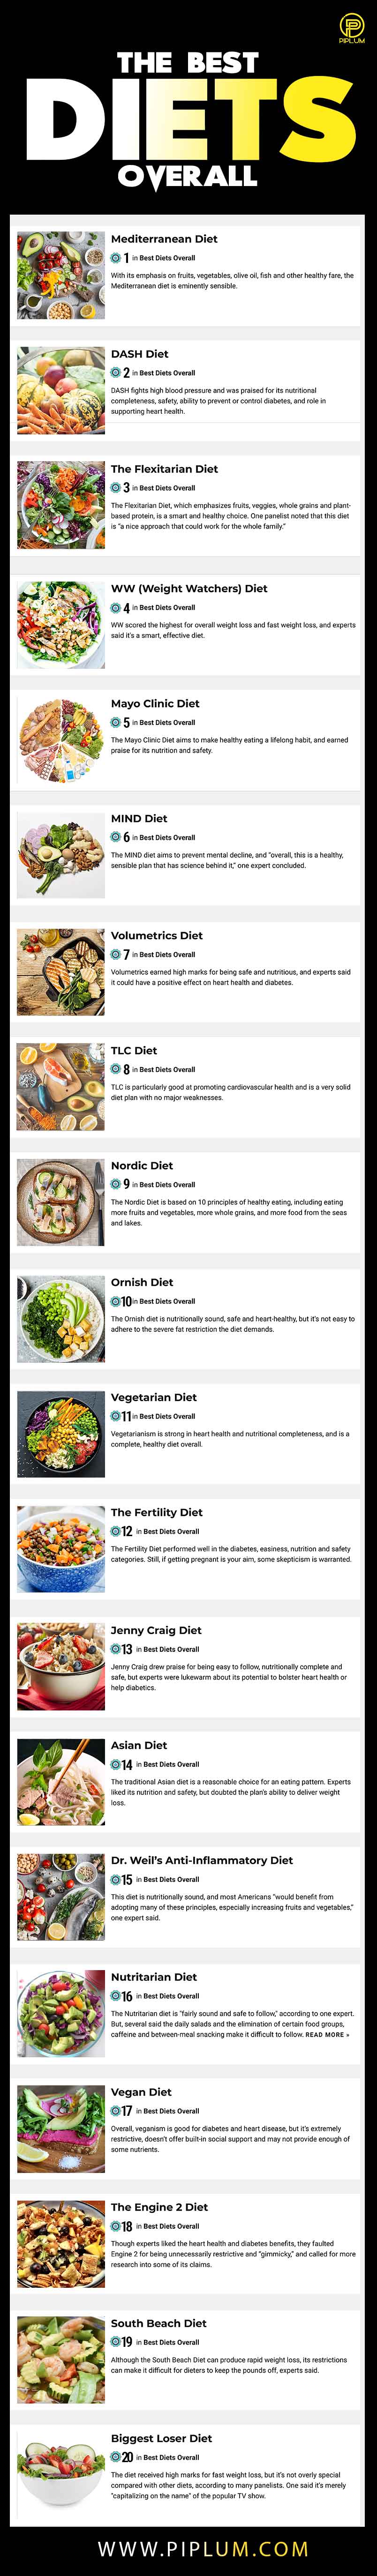 Best-diet-in-the-world-infographic-and-full-list